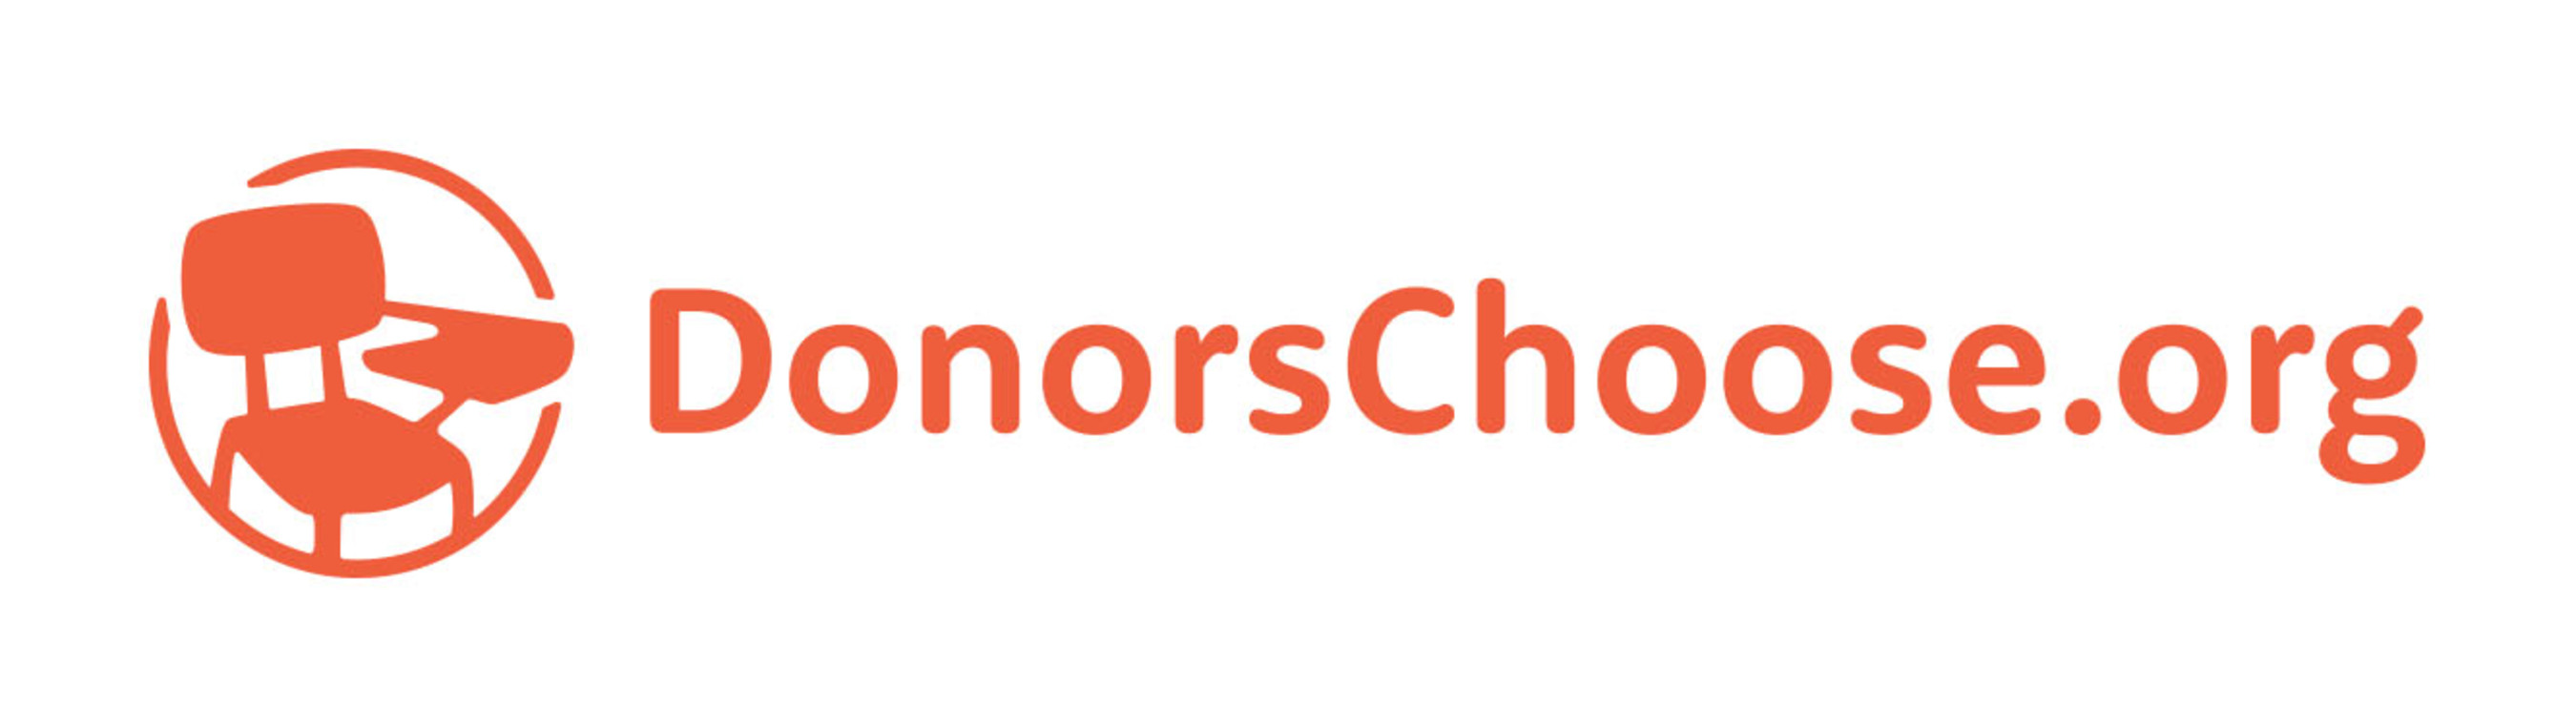 DonorsChoose.org, a crowdfunding non-profit that enables anyone to help a classroom in need, has been named one of Fast Company's "50 Most Innovative Companies in the World. (PRNewsFoto/DonorsChoose.org) (PRNewsFoto/DONORSCHOOSE.ORG)